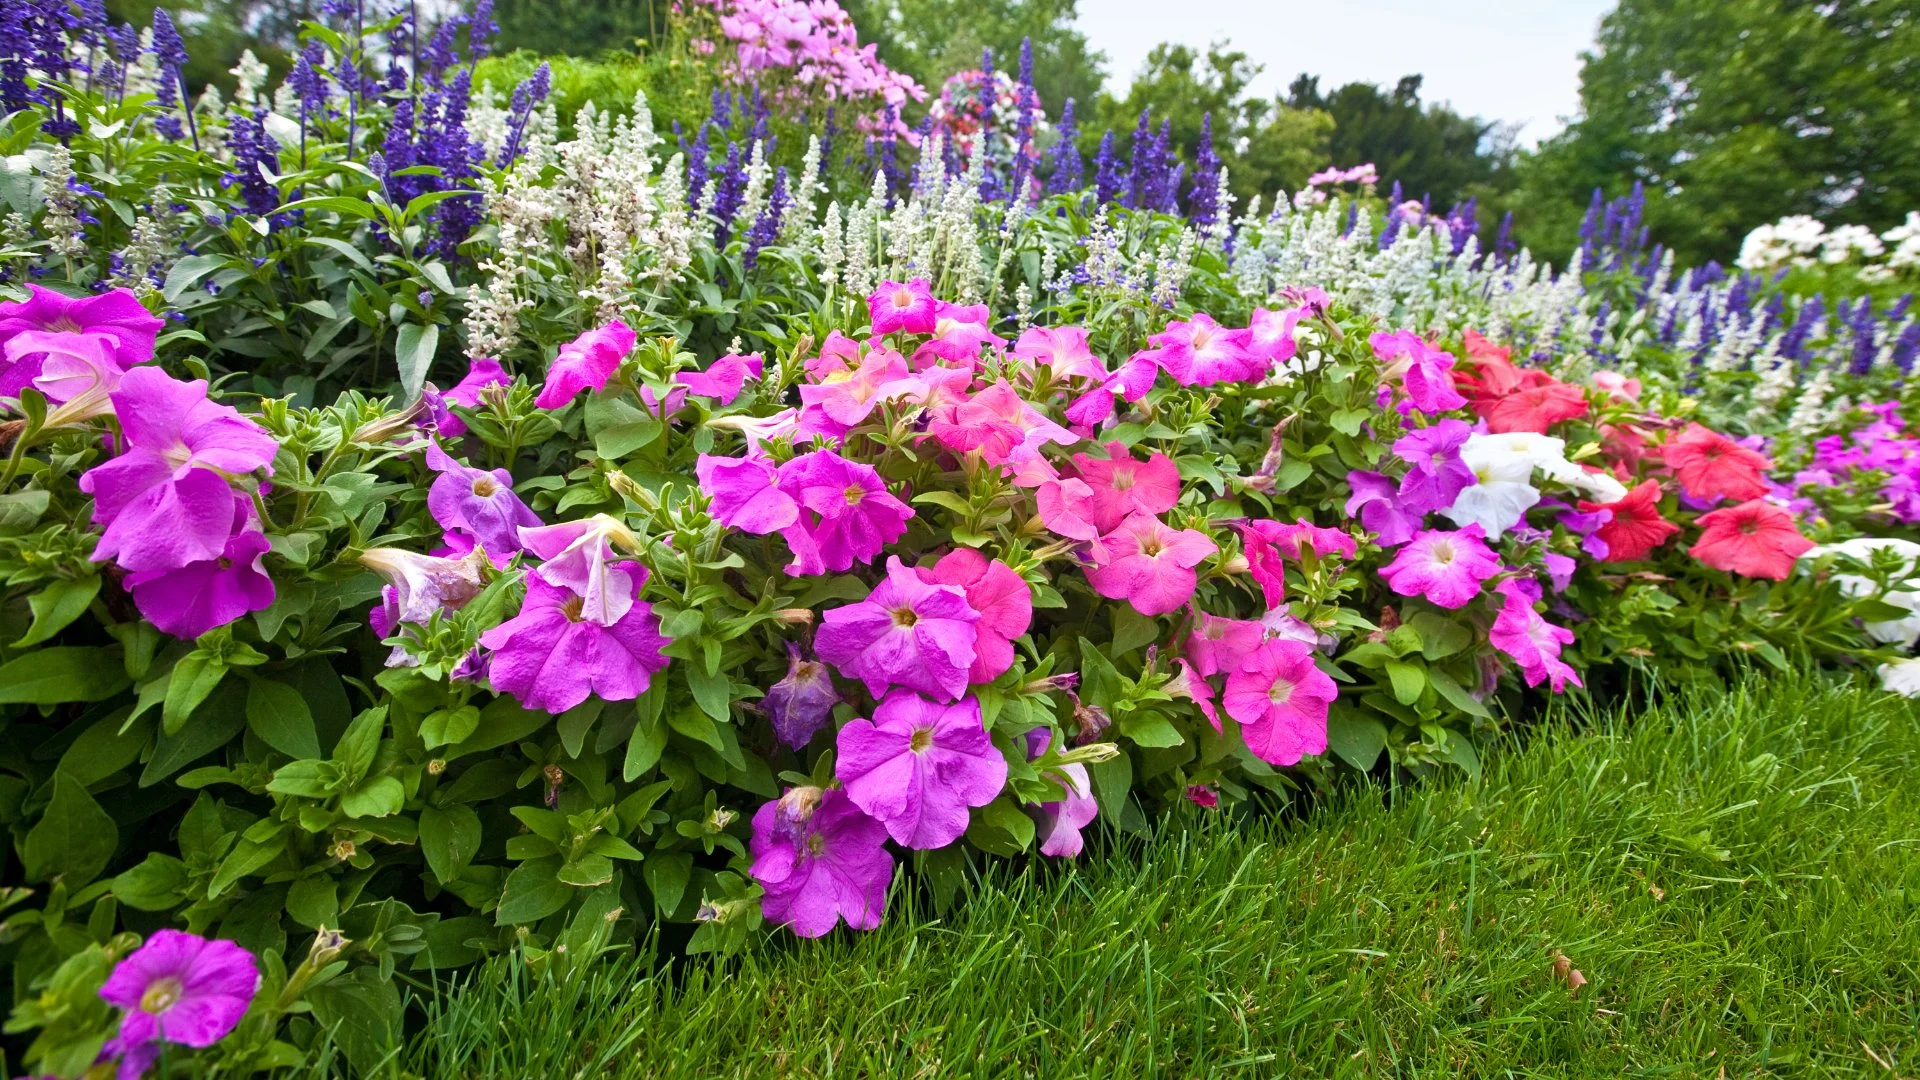 4 Things To Consider When Choosing Plants To Add to Your Landscape Beds